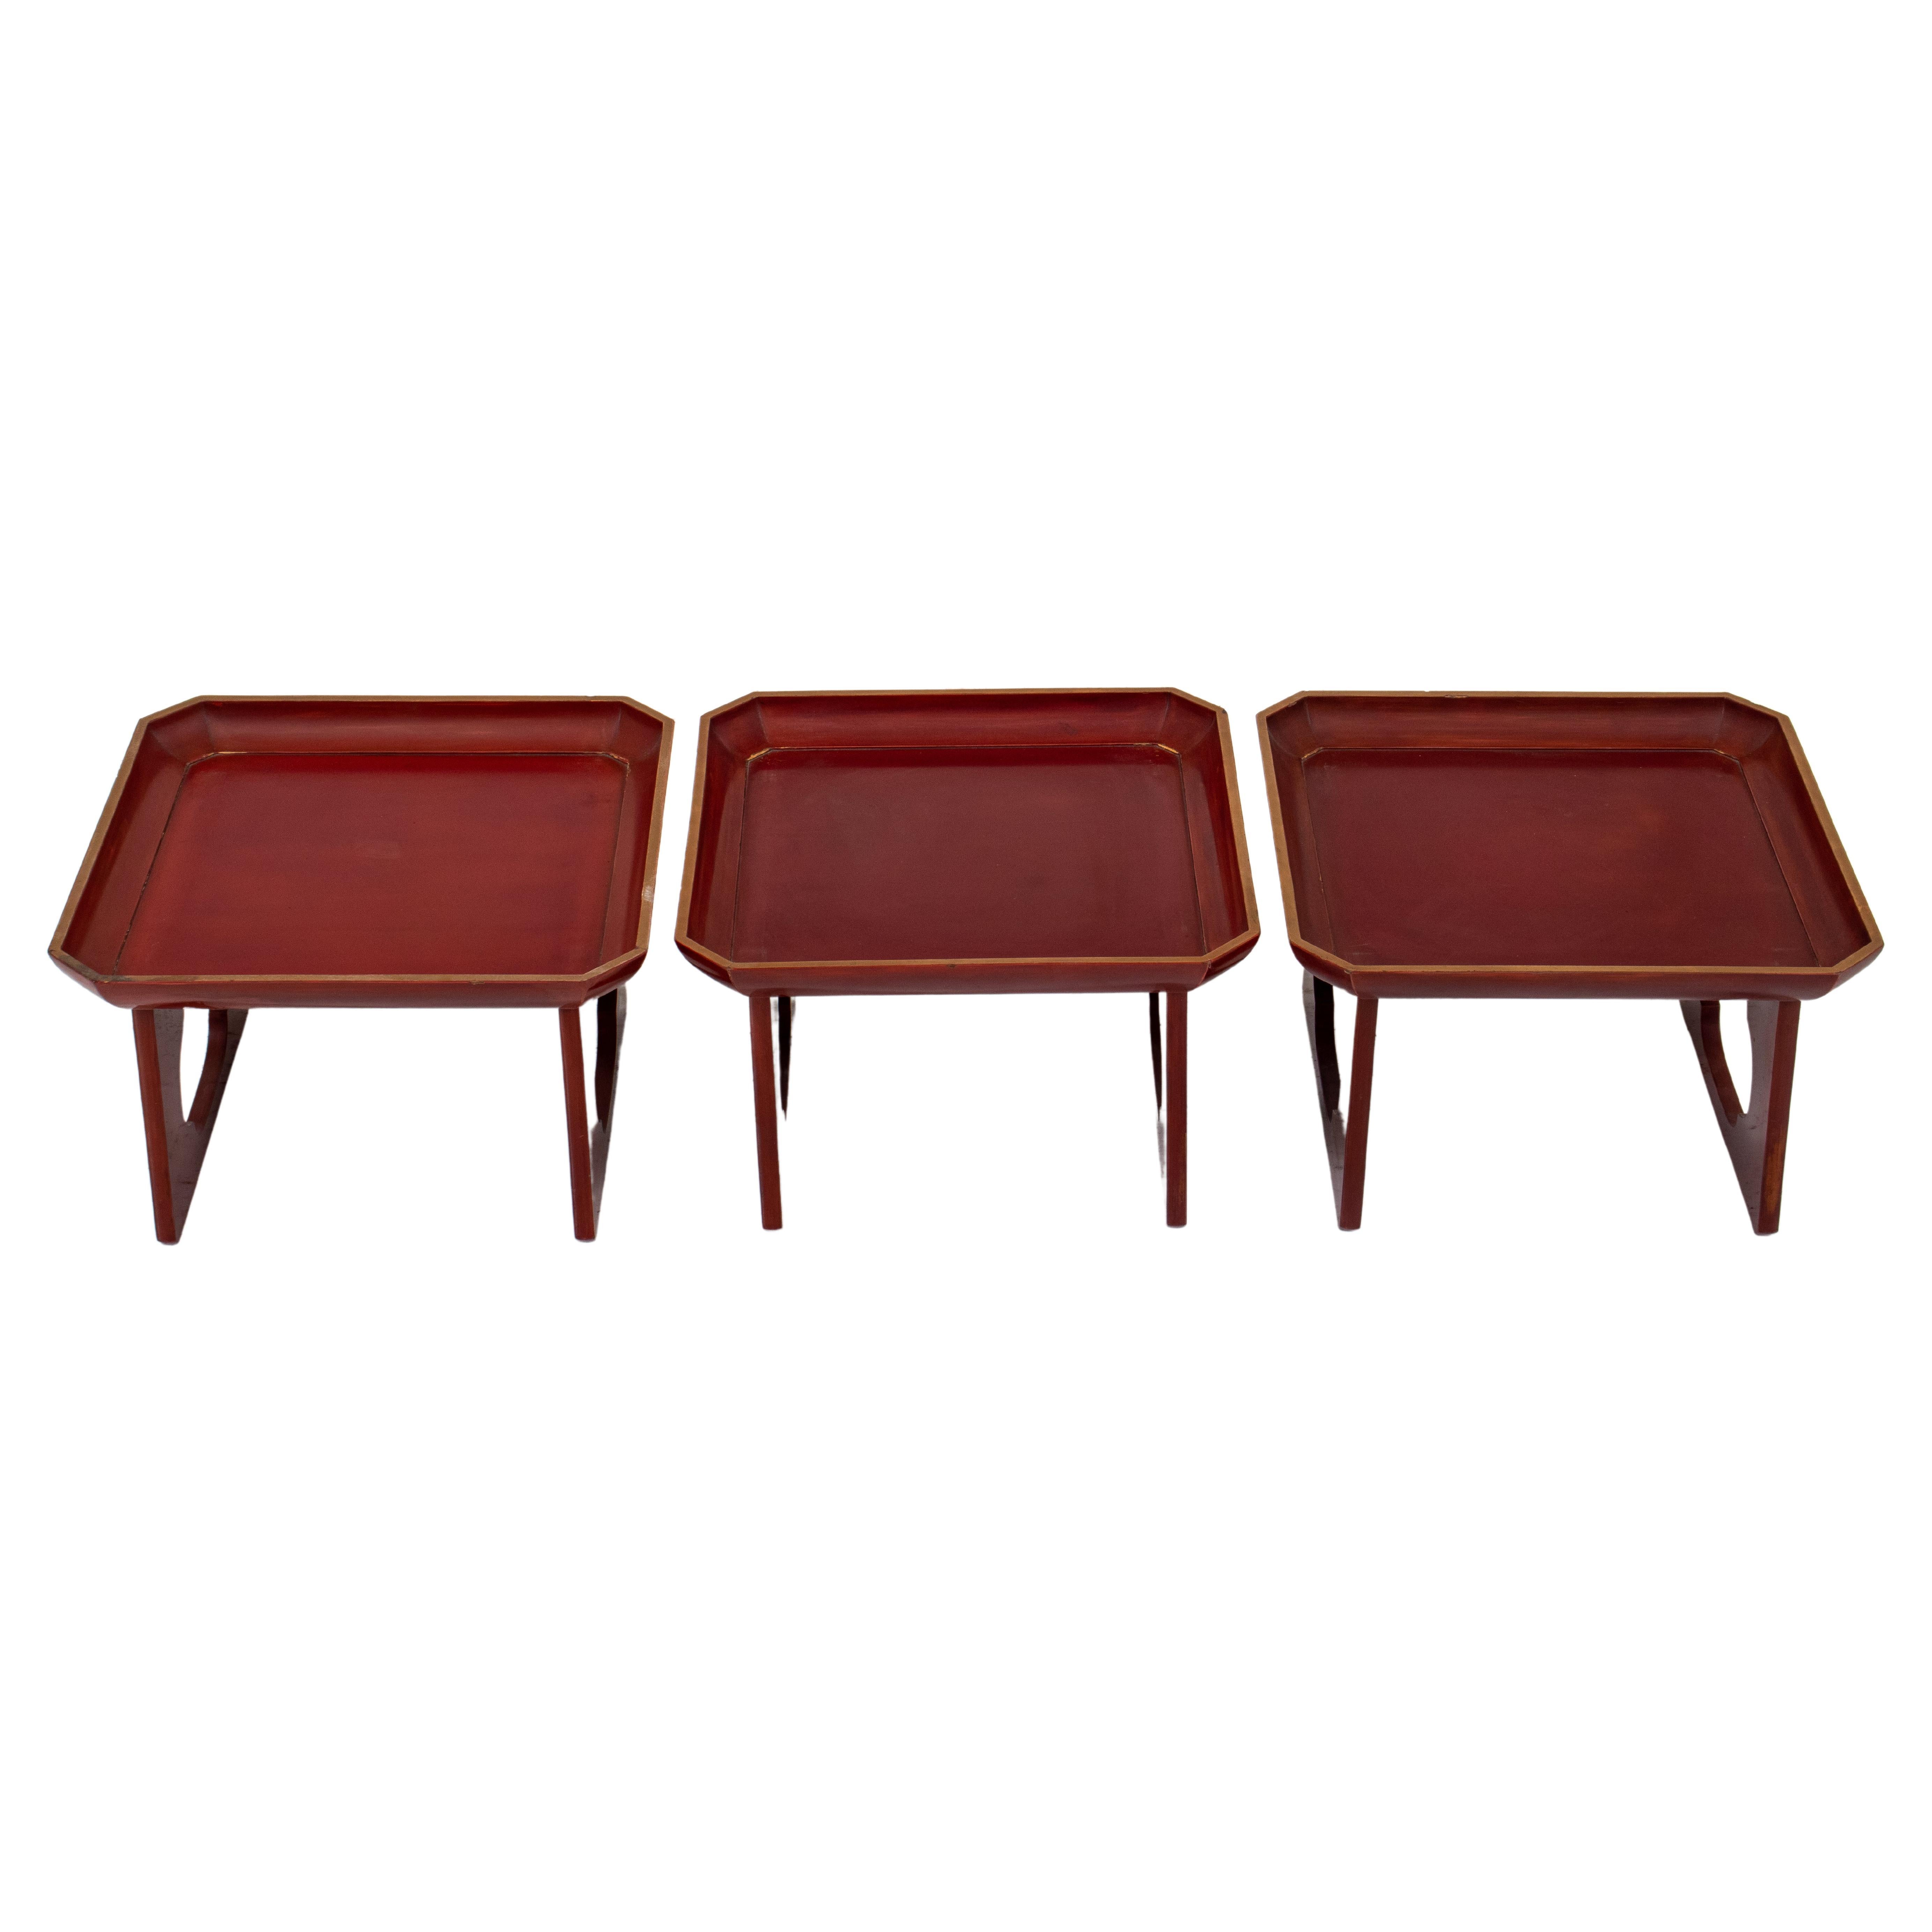 Chinese Copper Red Lacquer Stacking Tables, 3 For Sale